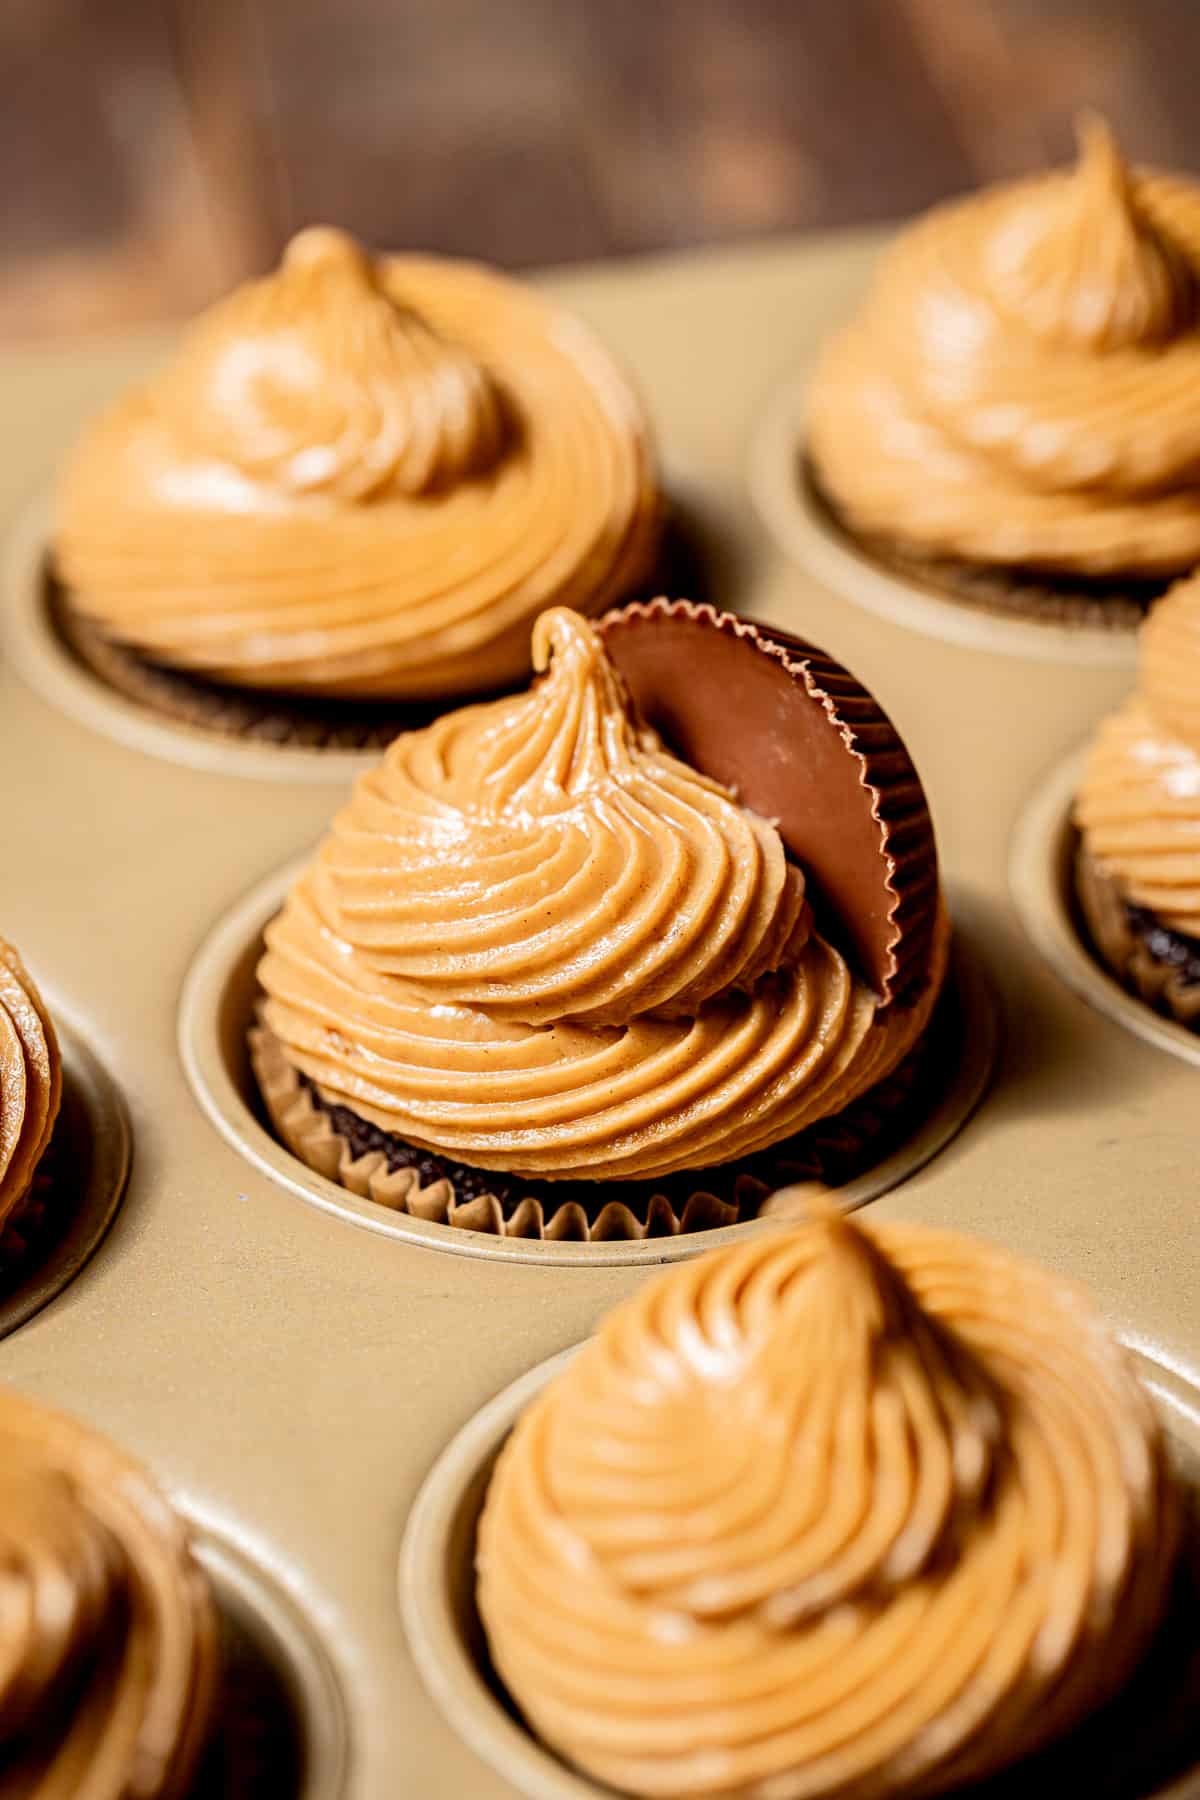 decorated chocolate peanut butter cupcakes in baking pan.